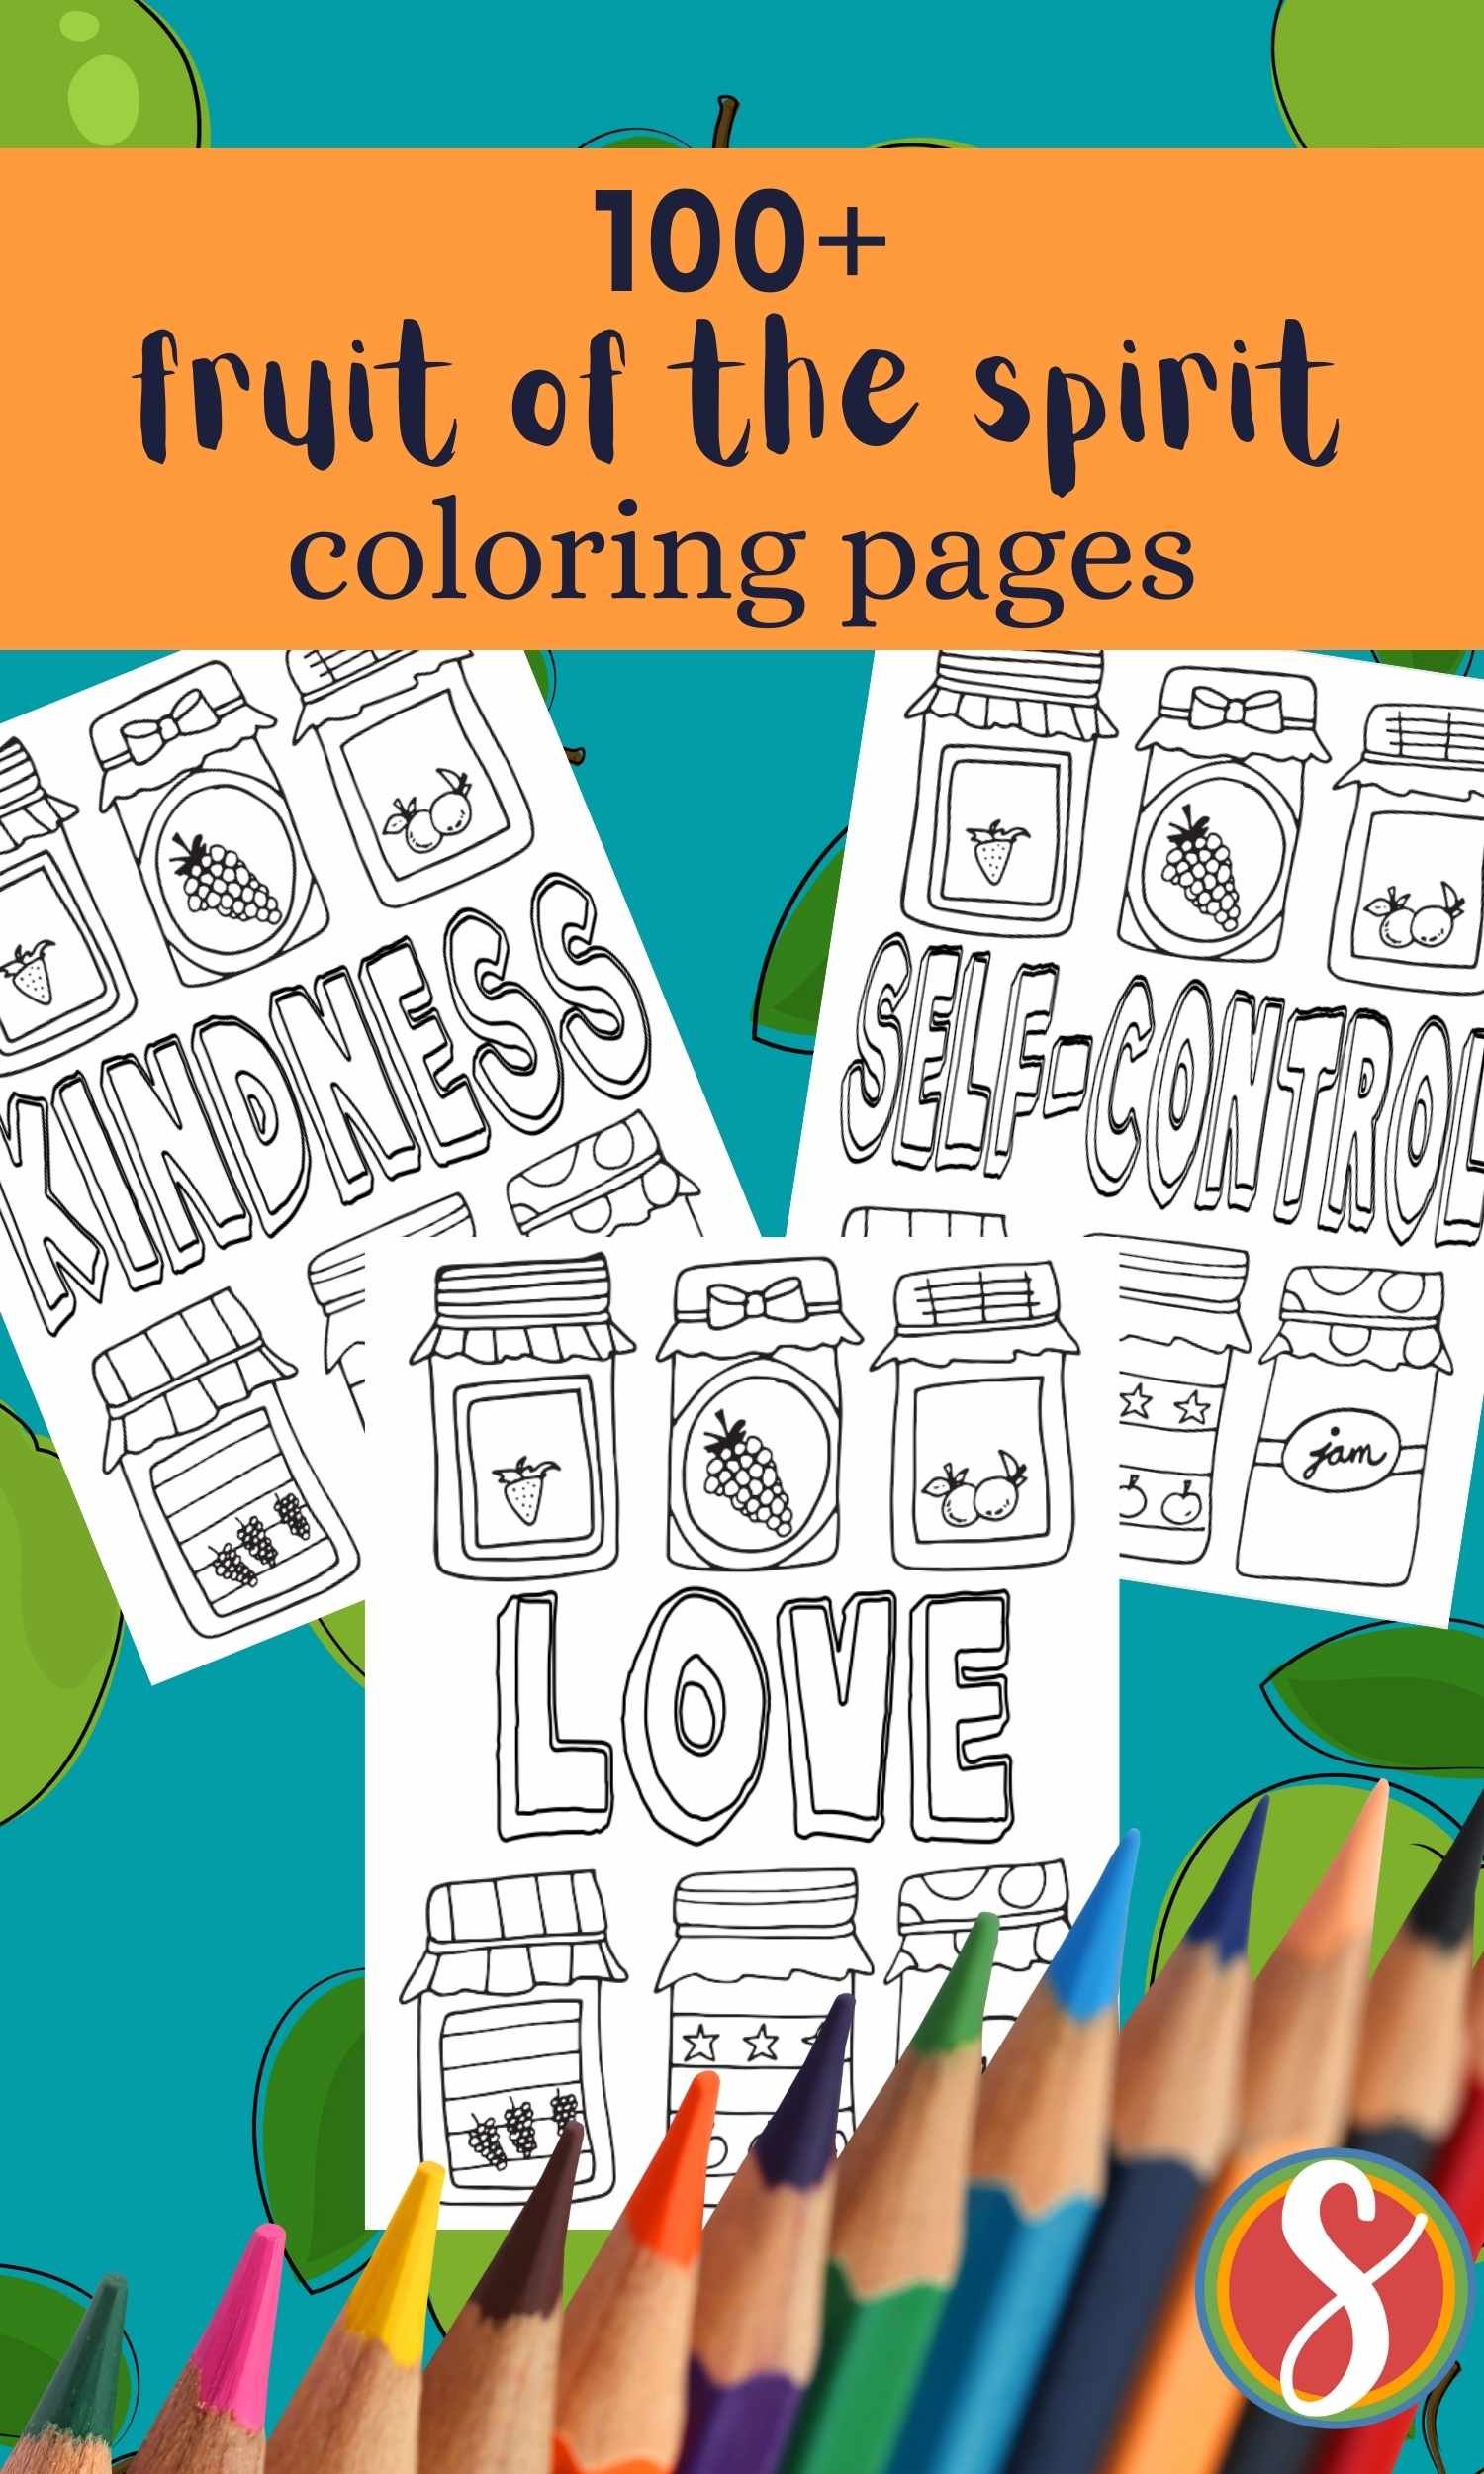 a collage of fruit of the spirit coloring pages, with the fruit in colorable letters surrounded by 6 colorable jam jars